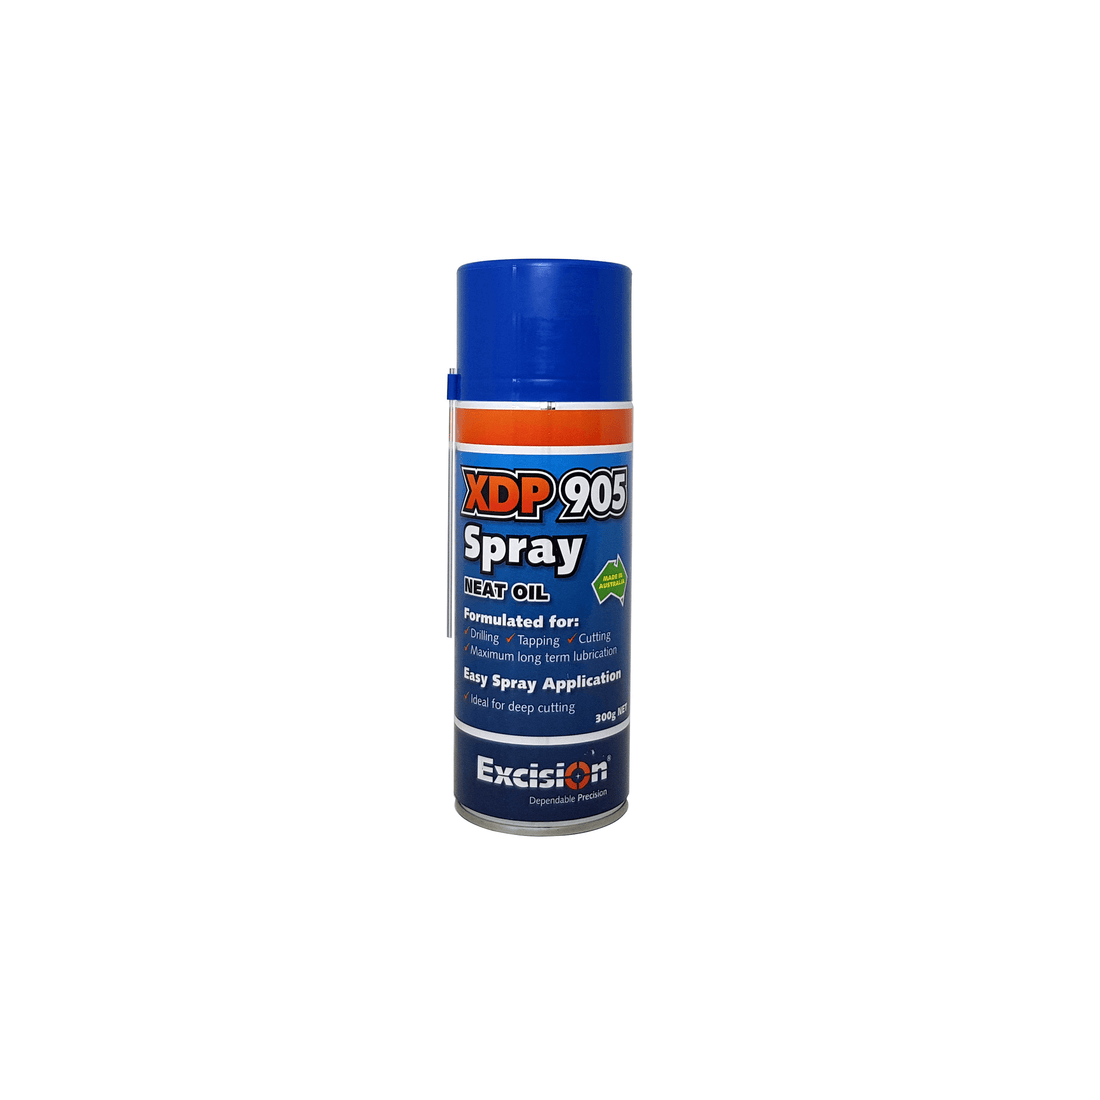 XDP905 Spray Excision